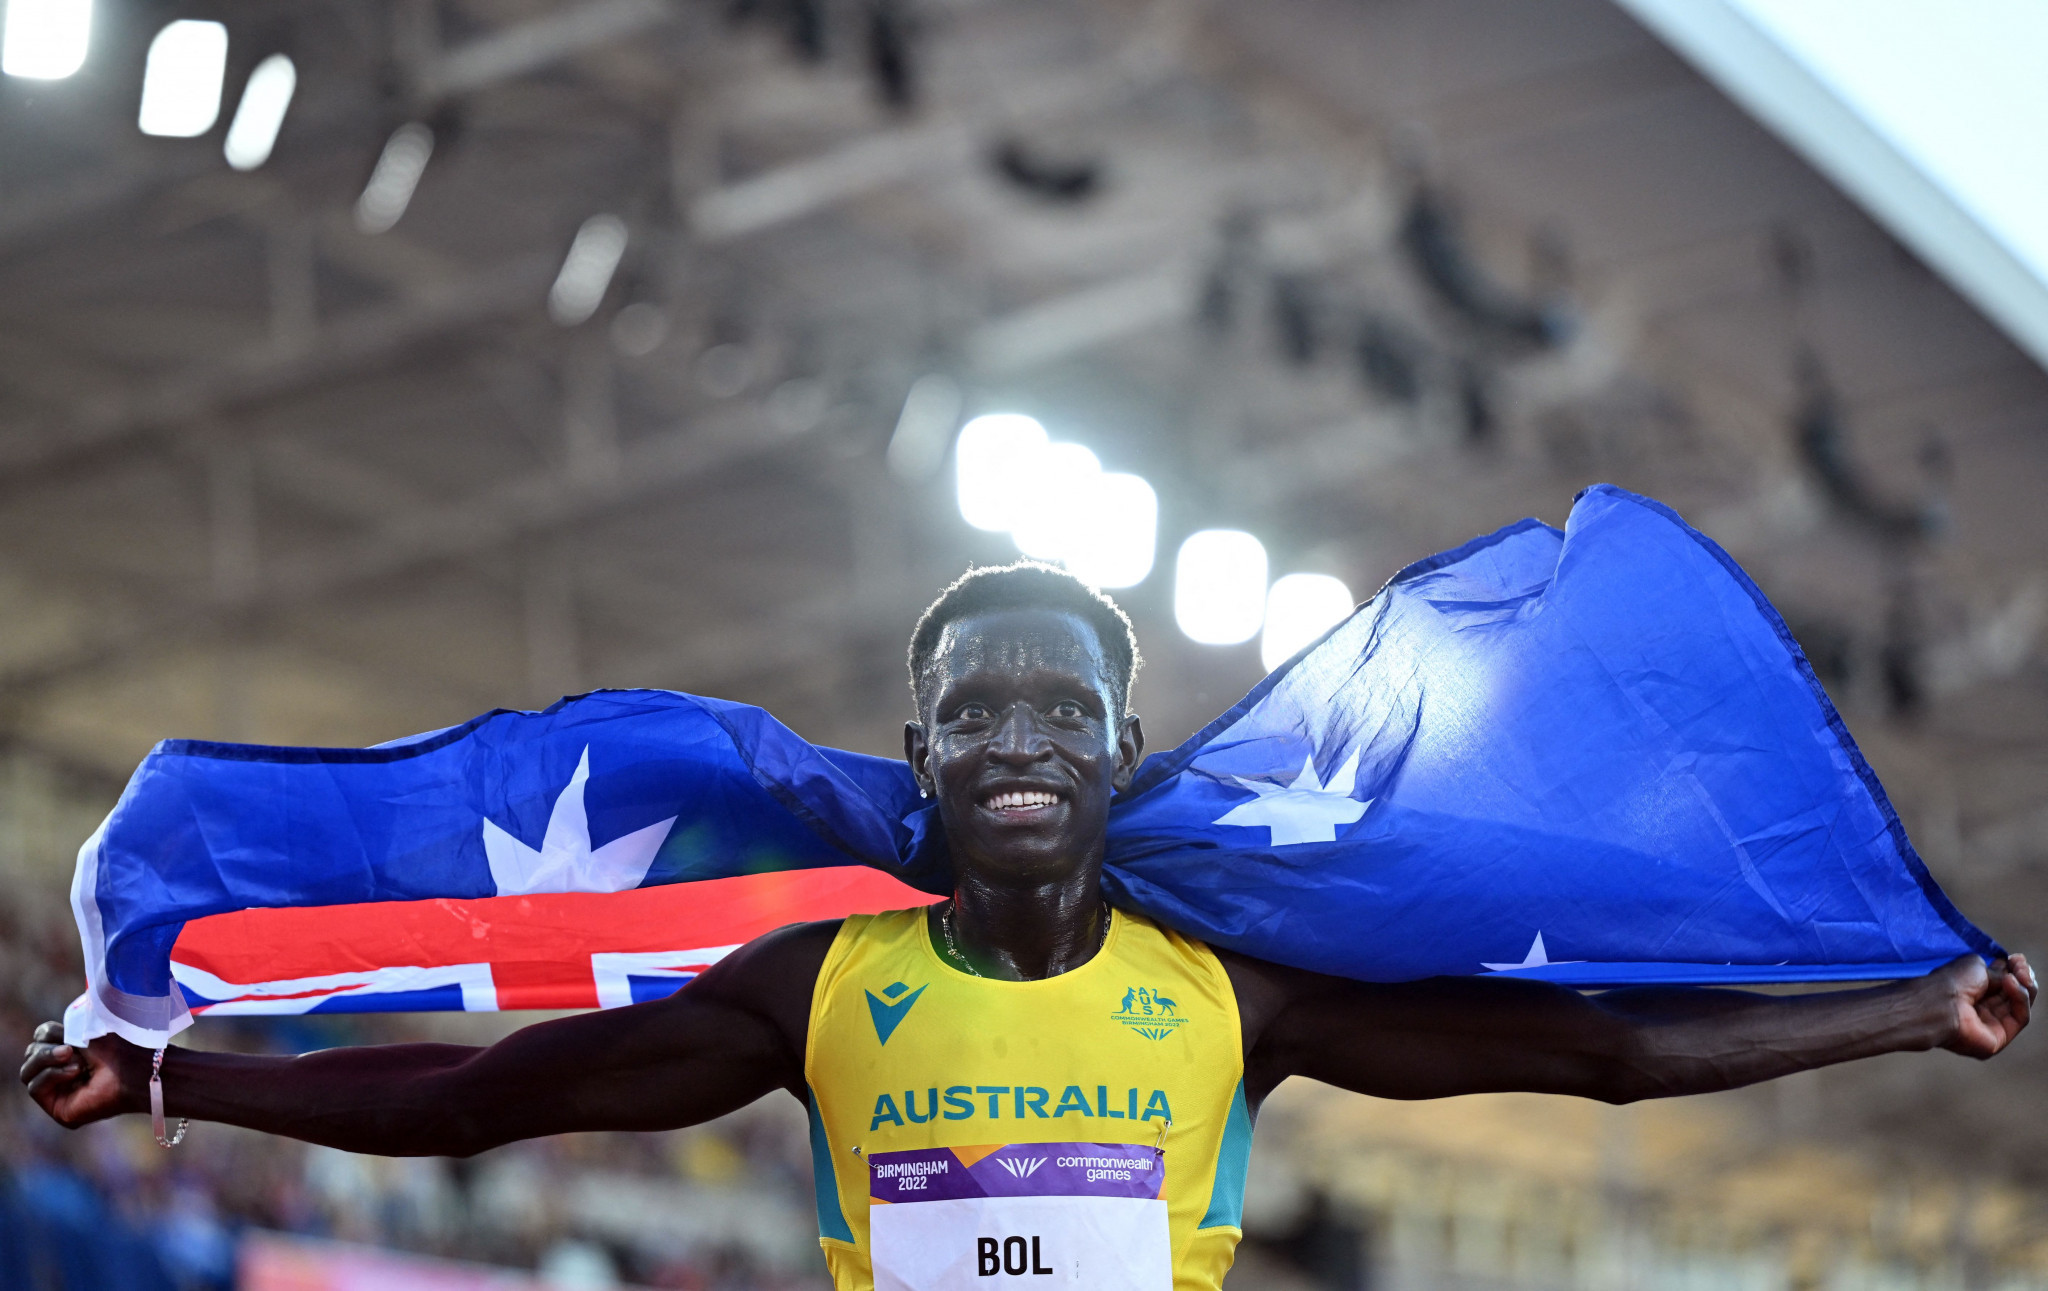 Commonwealth Games medallist Bol claims innocence after testing positive for EPO